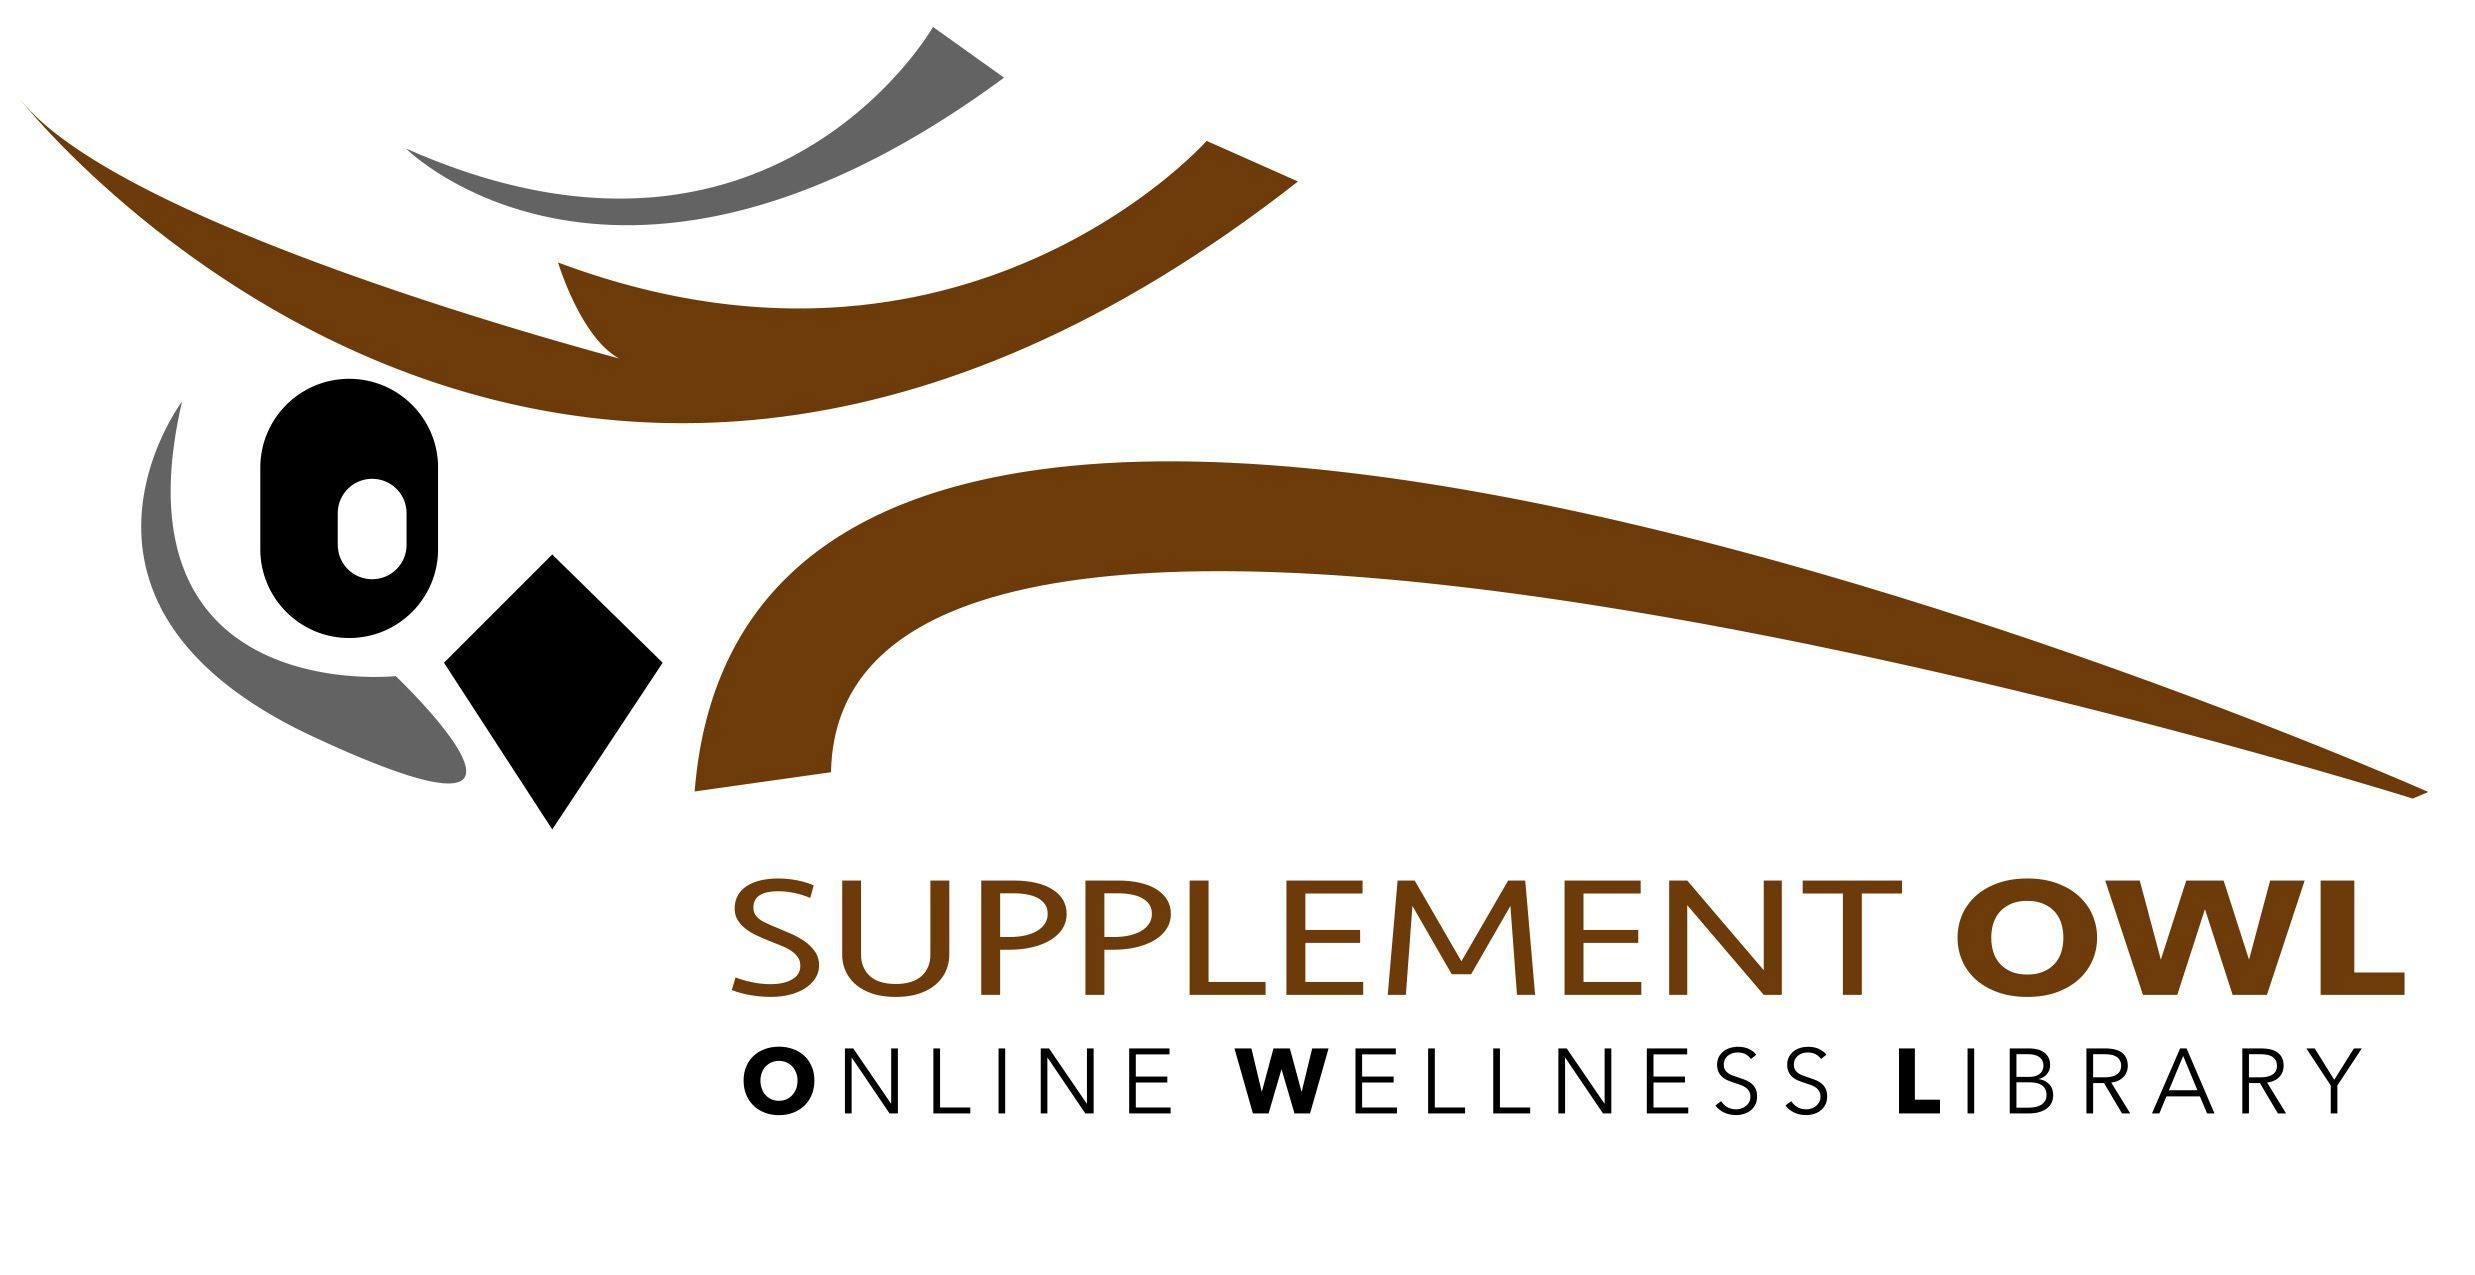 Industry Partners Assist Companies in Participating in Supplement OWL